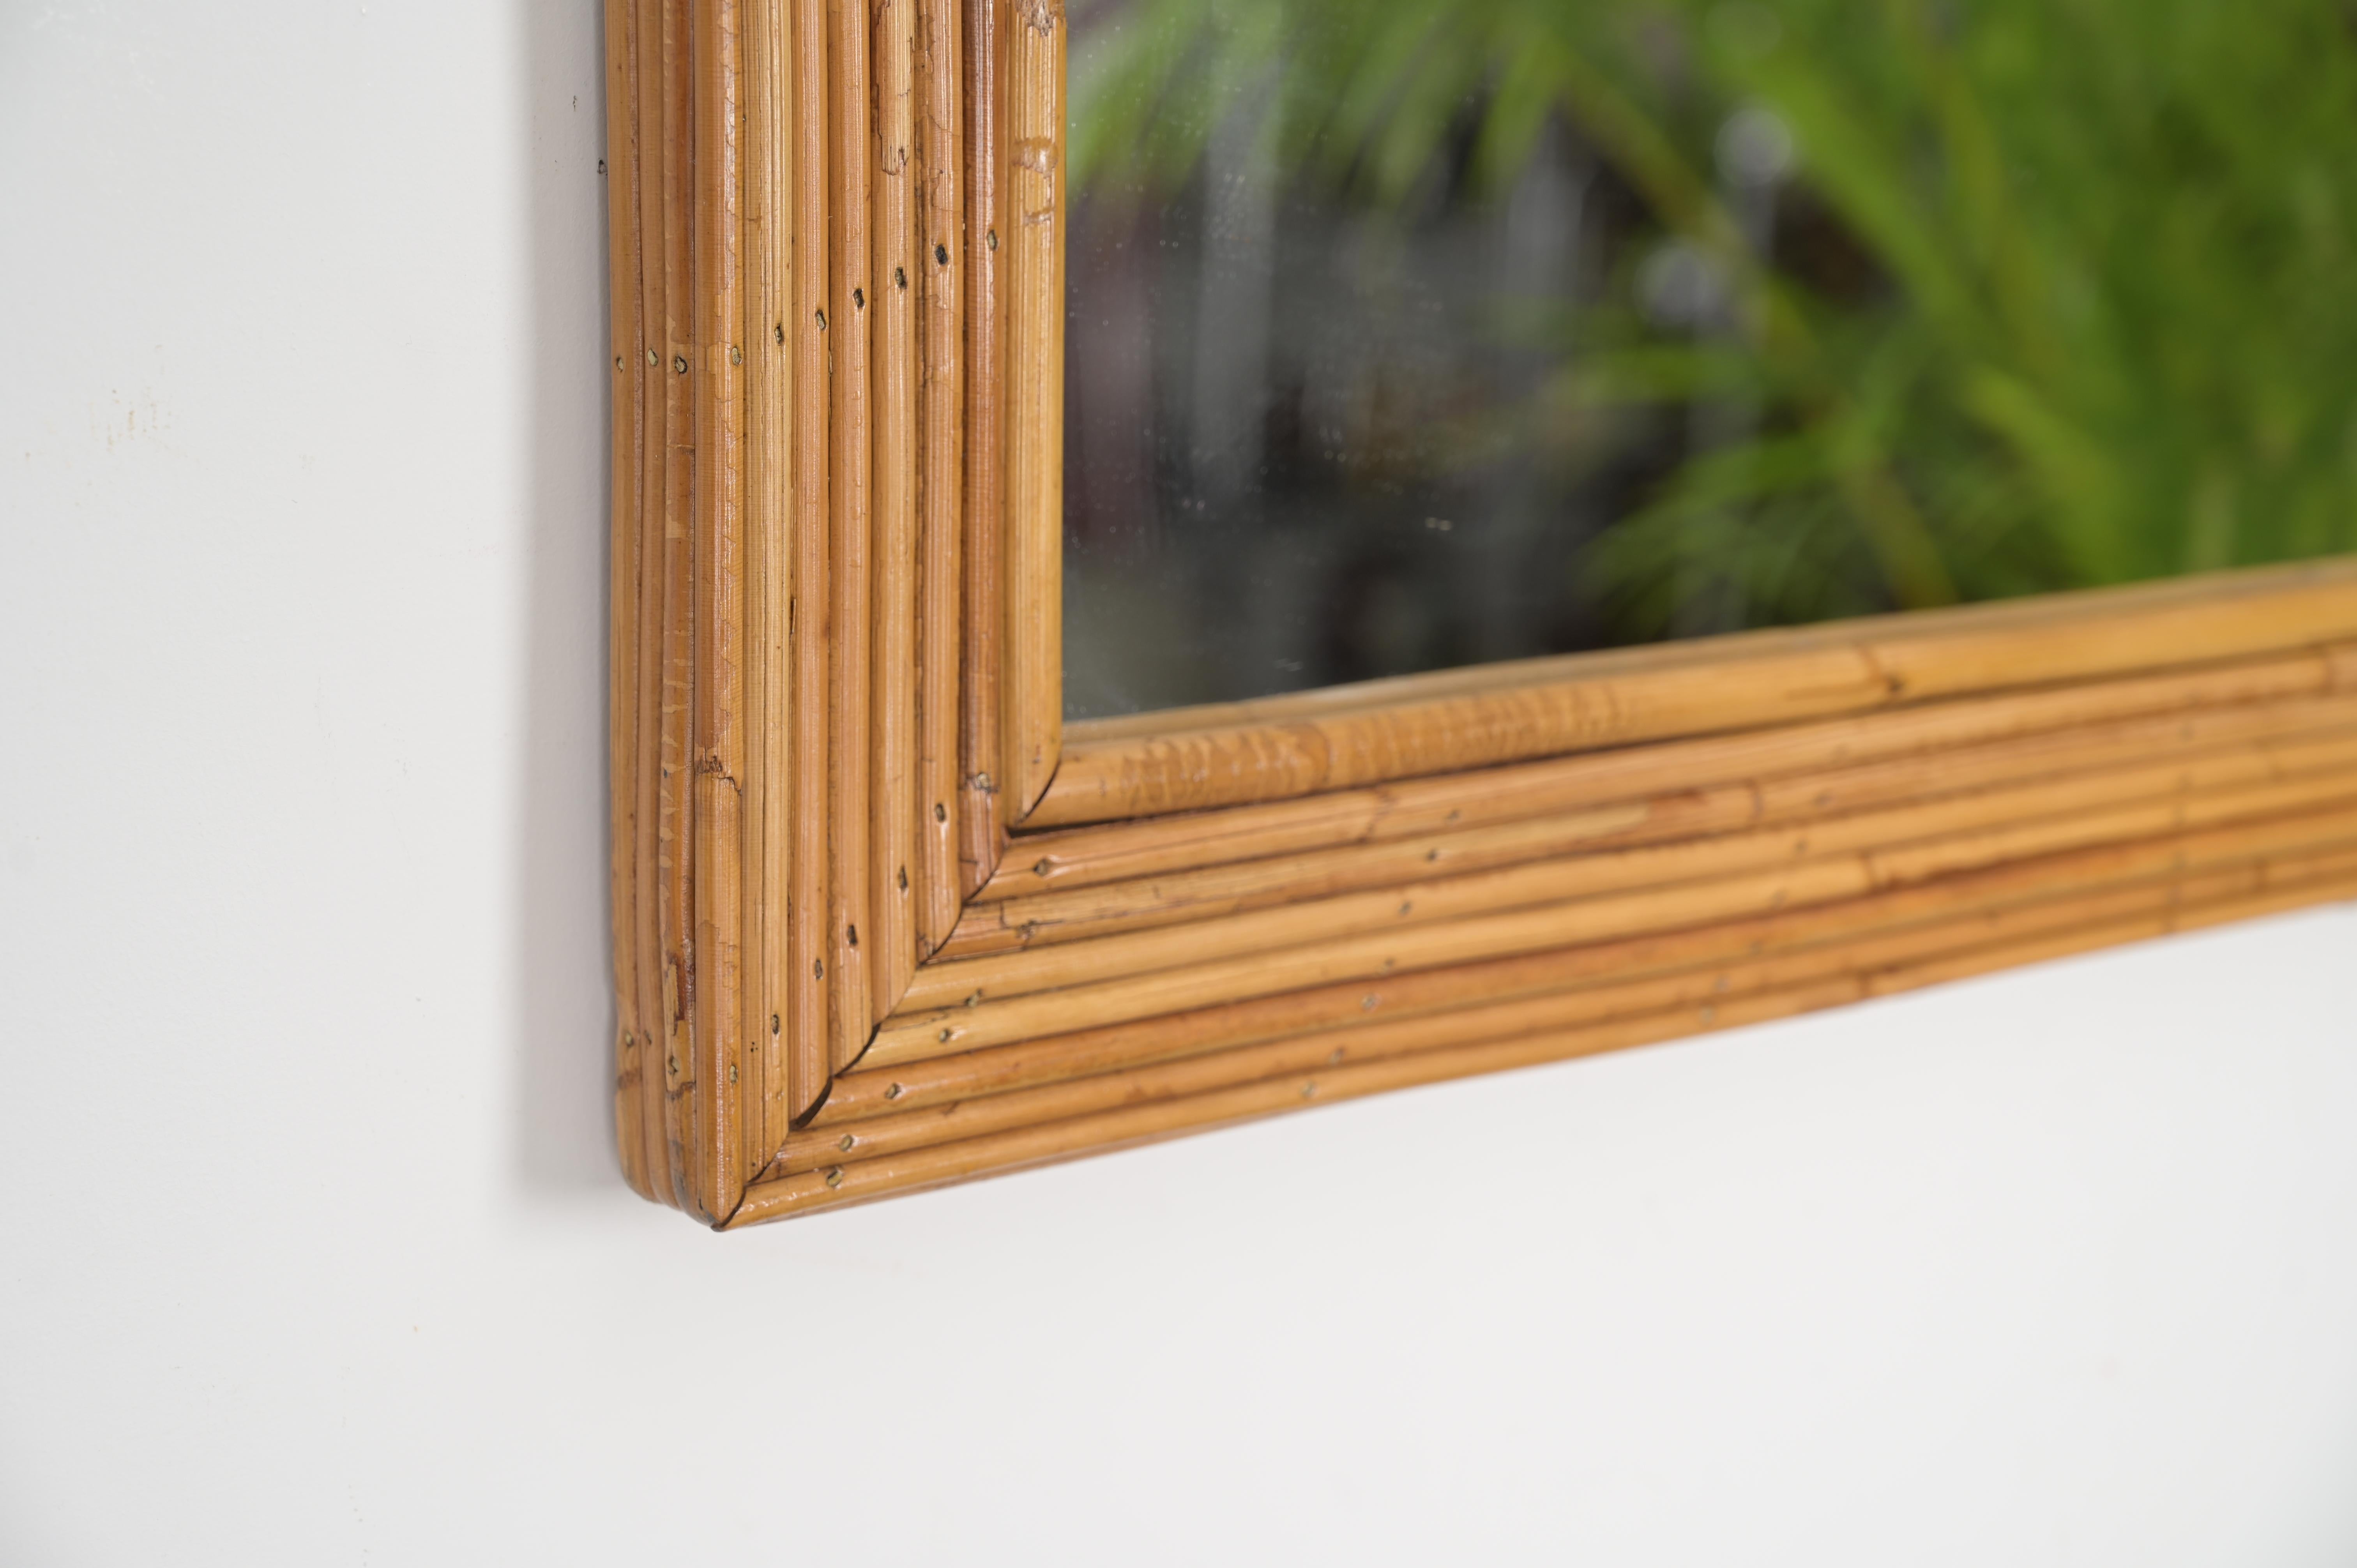 Italian Mid-Century Rectangular Bamboo and Rattan Mirror by Vivai del Sud, Italy 1960s For Sale